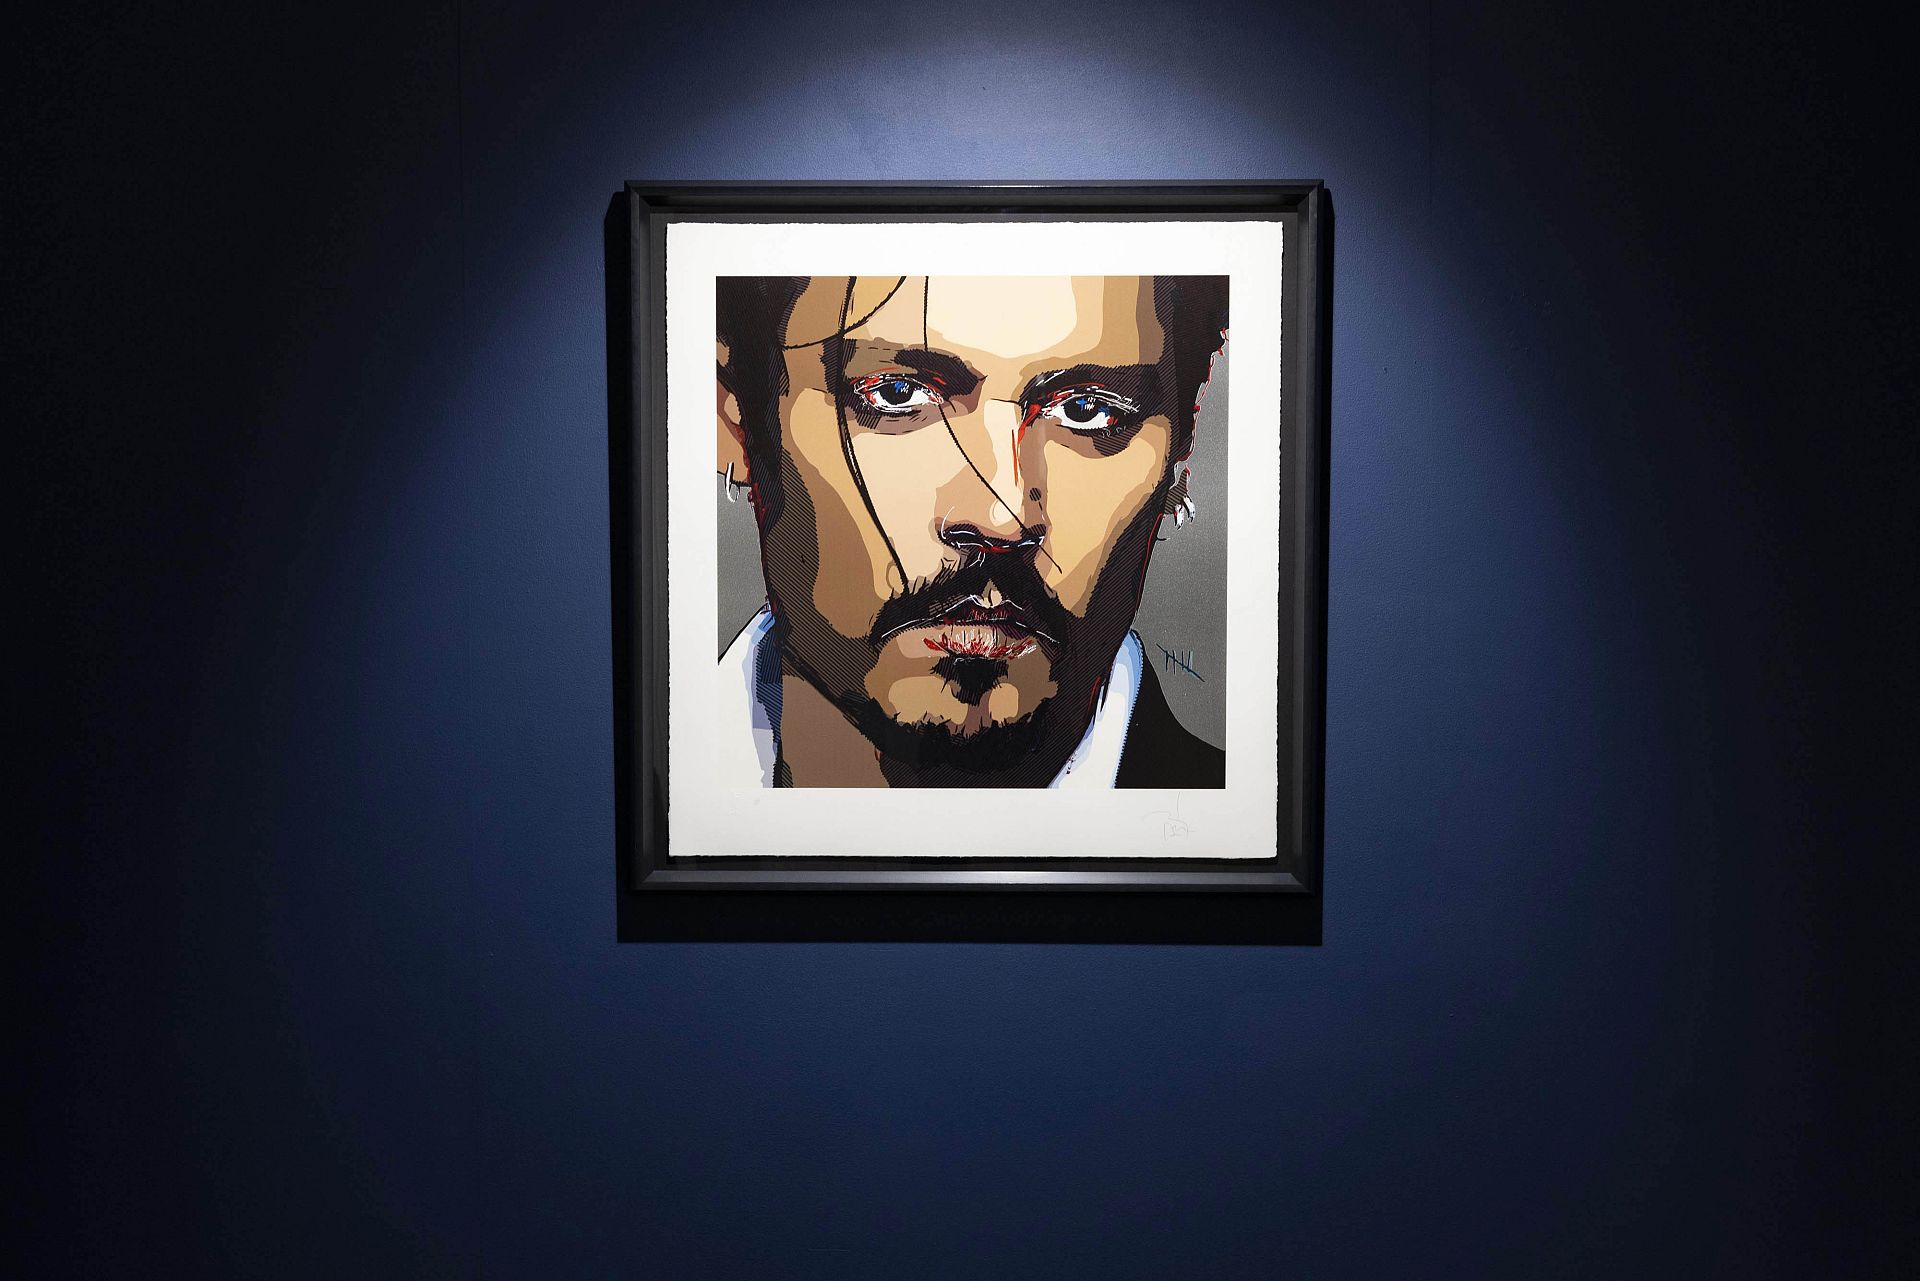 Johnny Depp's deeply personal debut self-portrait goes up for auction ...